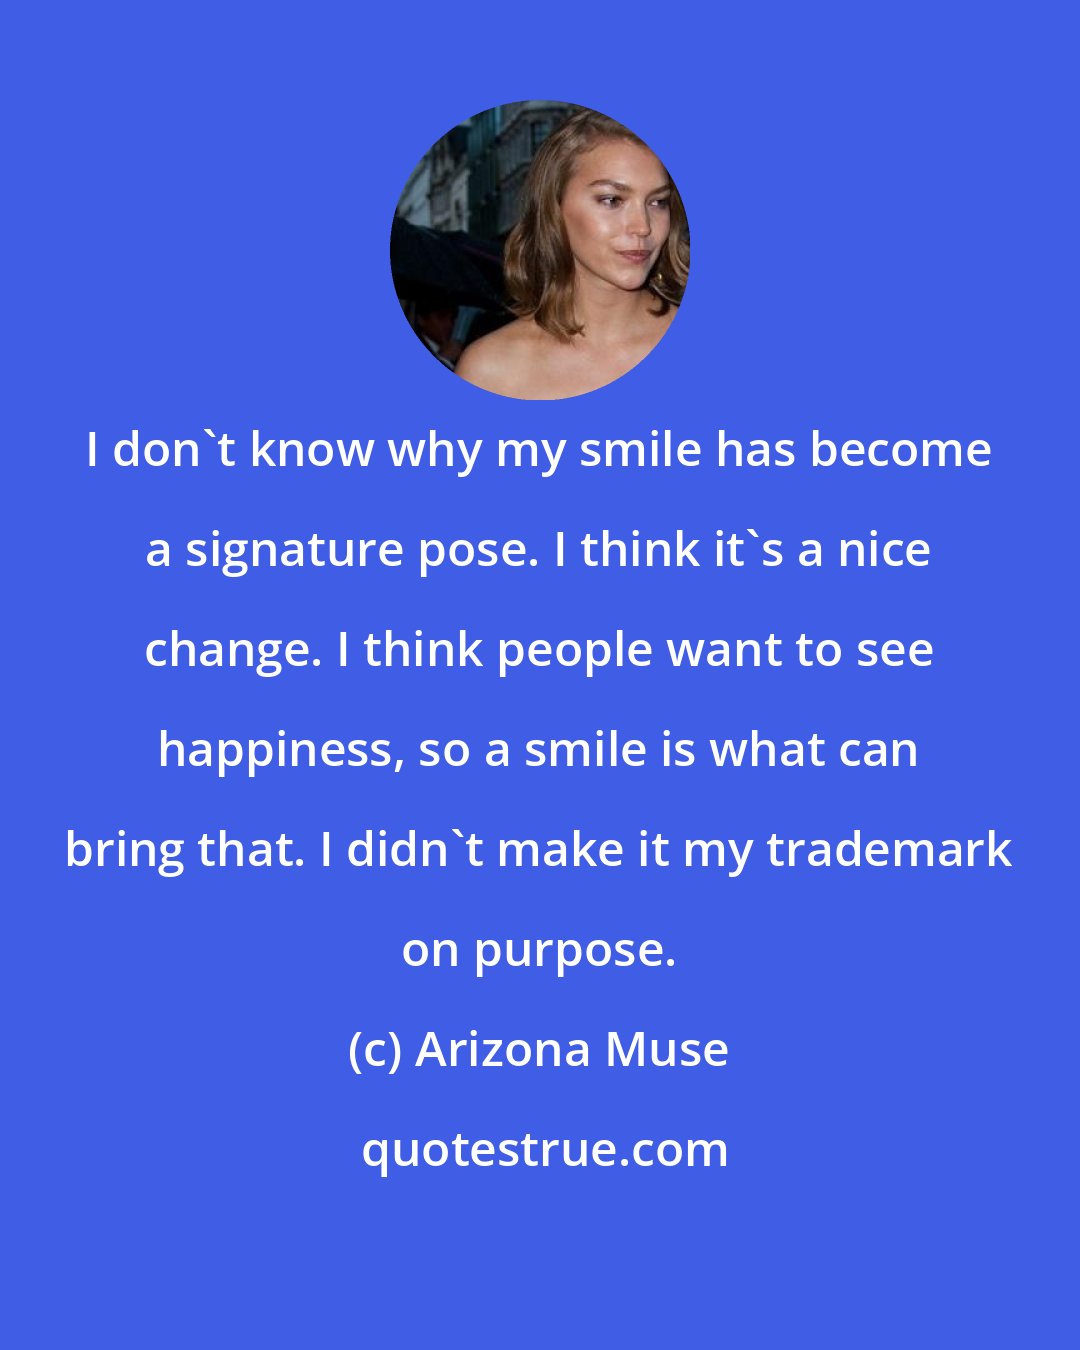 Arizona Muse: I don't know why my smile has become a signature pose. I think it's a nice change. I think people want to see happiness, so a smile is what can bring that. I didn't make it my trademark on purpose.